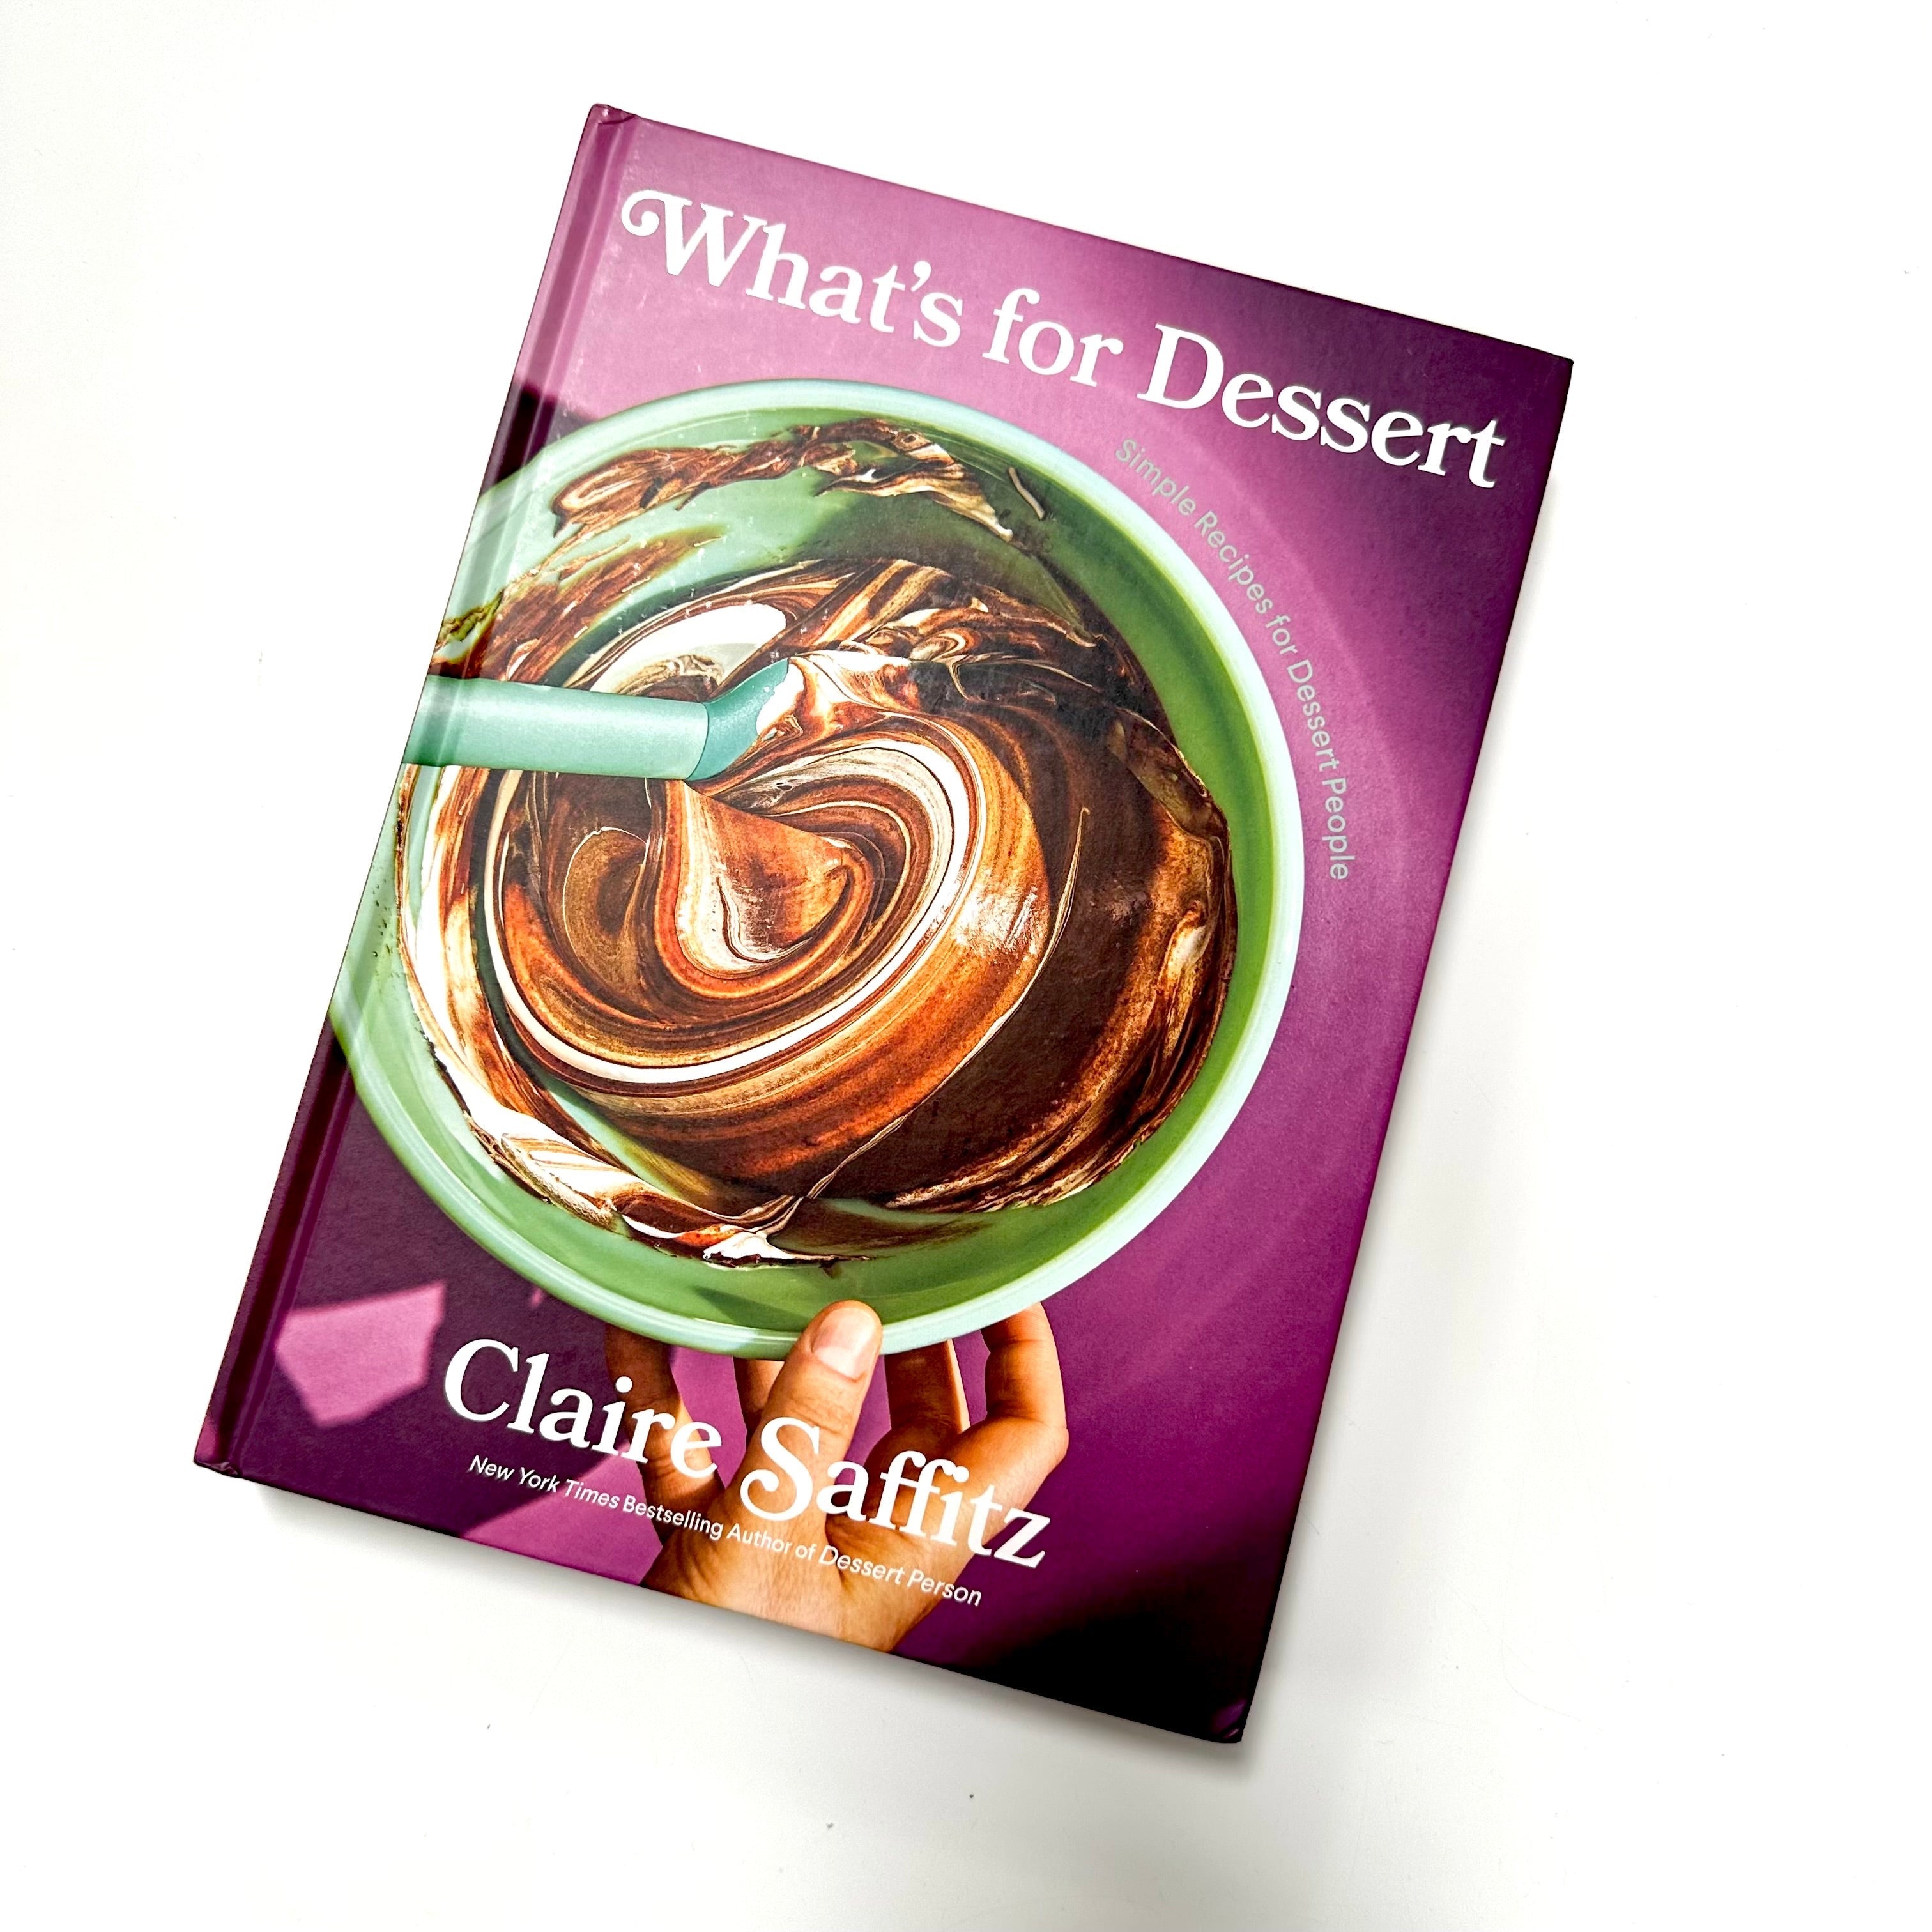 A purple hardcover book with a mixing bowl of brown mixture. White text on book reads, "What's for Dessert Simple Recipes for Dessert People Claire Saffitz". Photographed on white background.